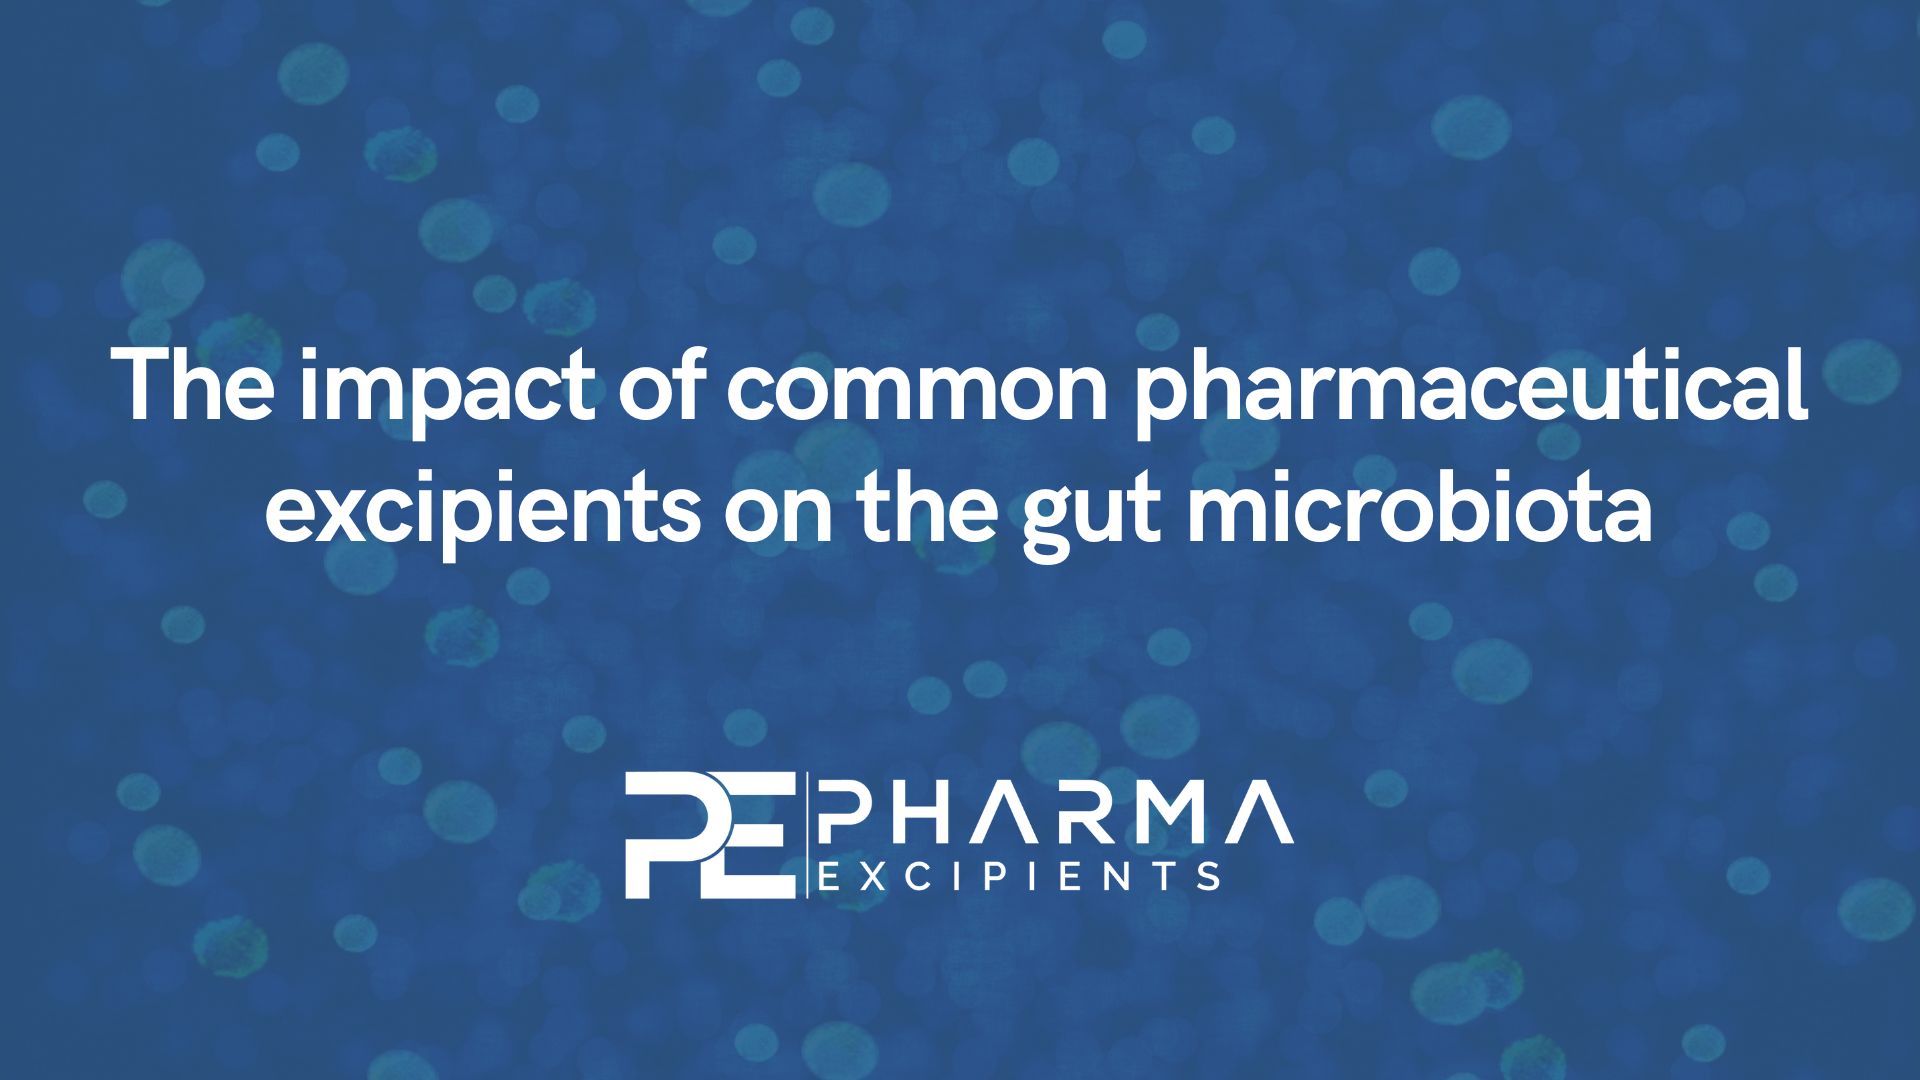 The impact of common pharmaceutical excipients on the gut microbiota